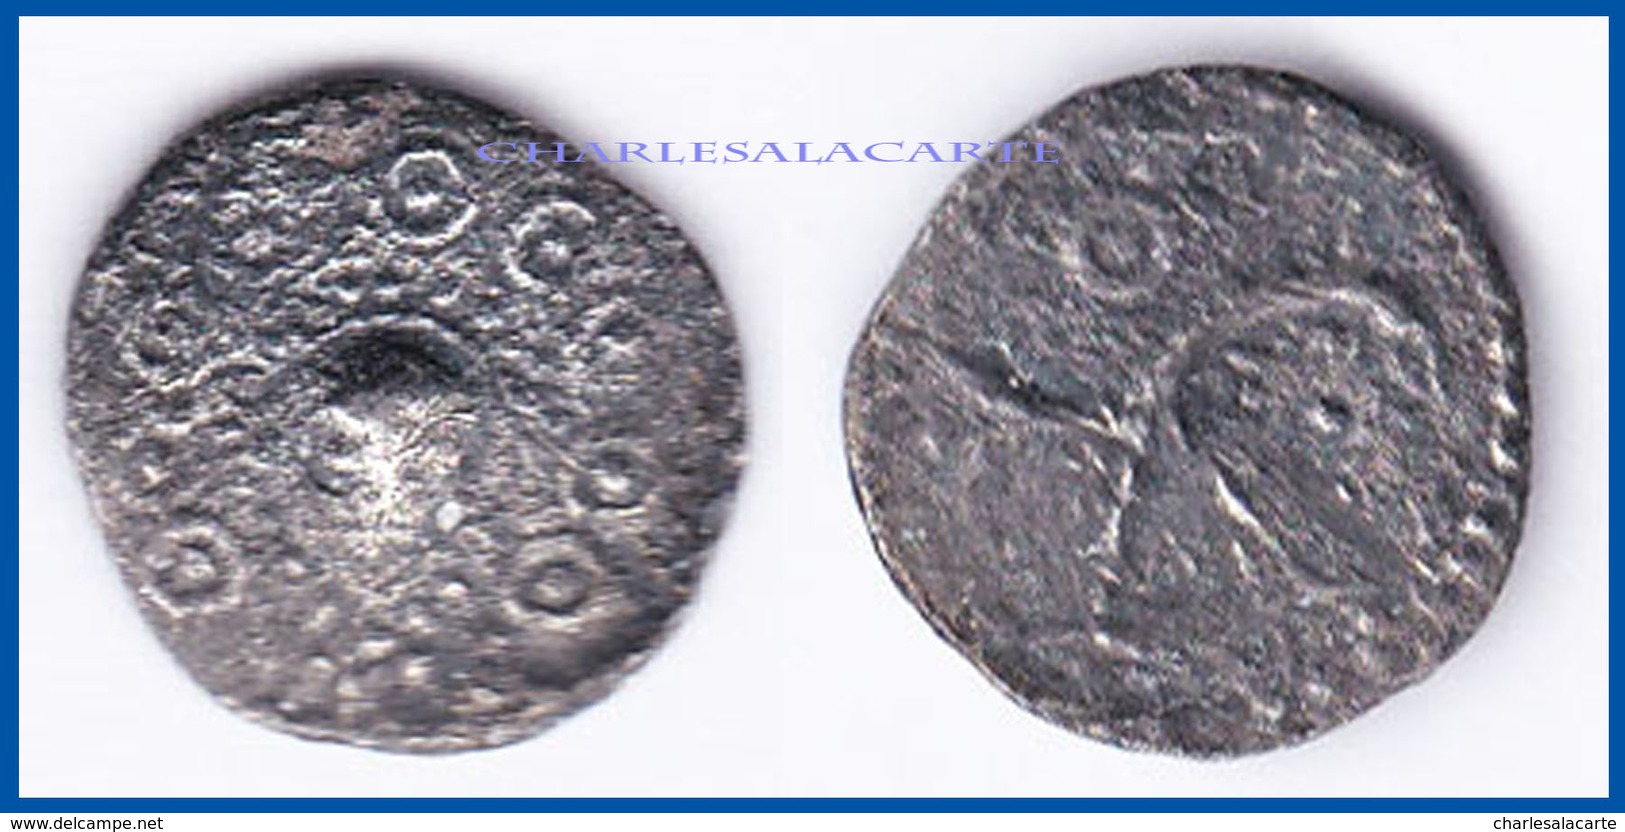 GREAT BRITAIN C.710-760 SILVER SCEAT  SERIES H  TYPE 49  FINE CONDITION - …-1066 : Celtiques / Anglo-Saxonnes